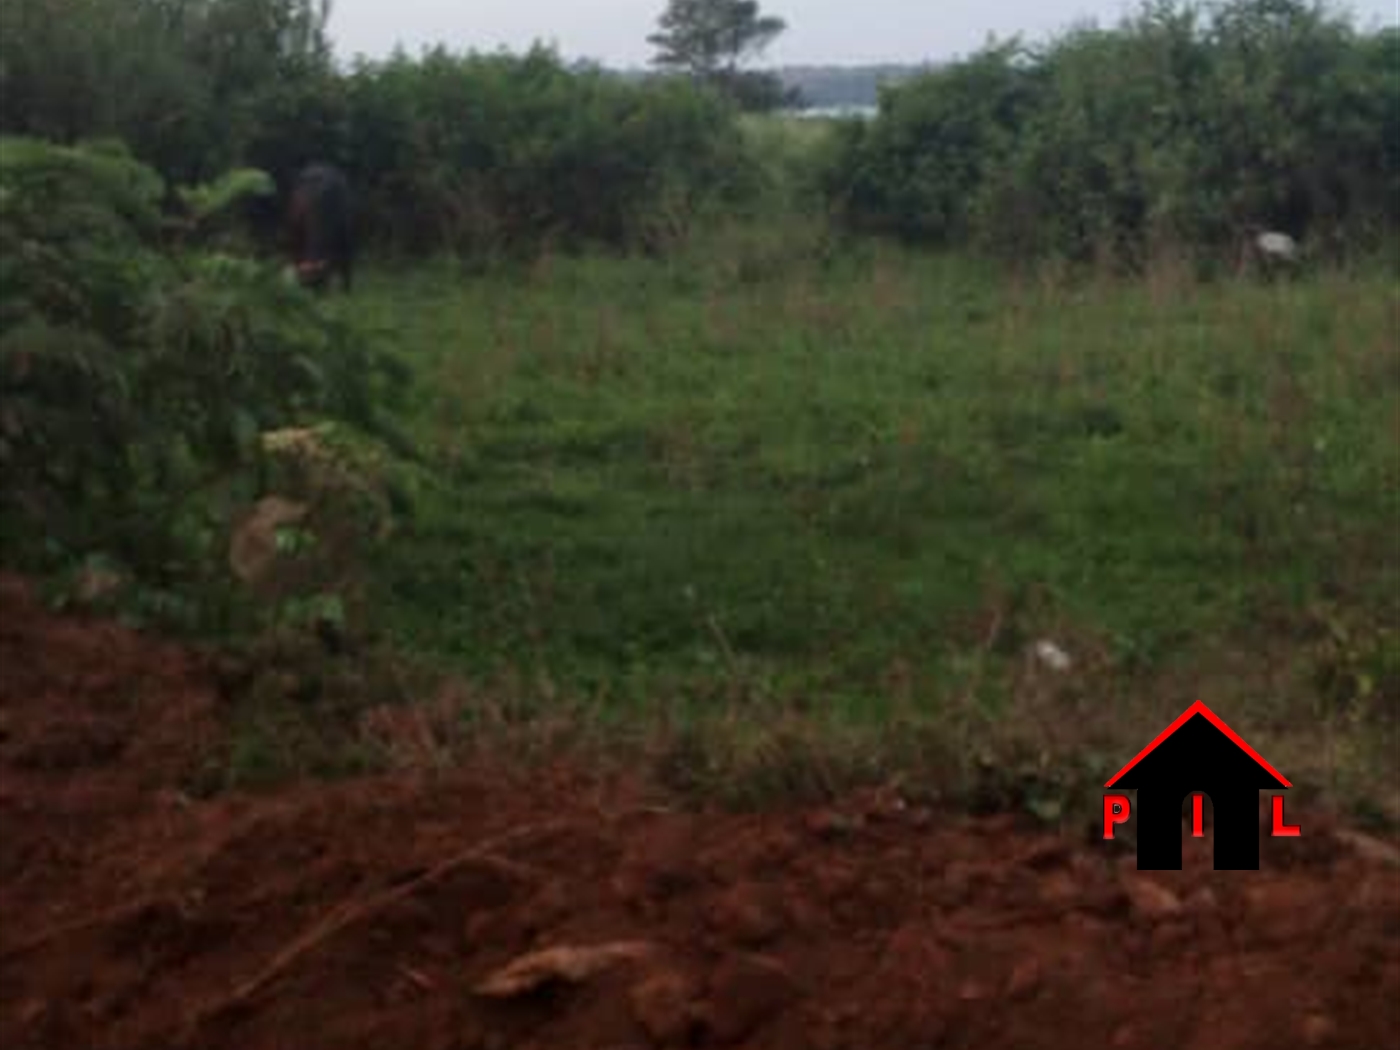 Commercial Land for sale in Busaabala Kampala